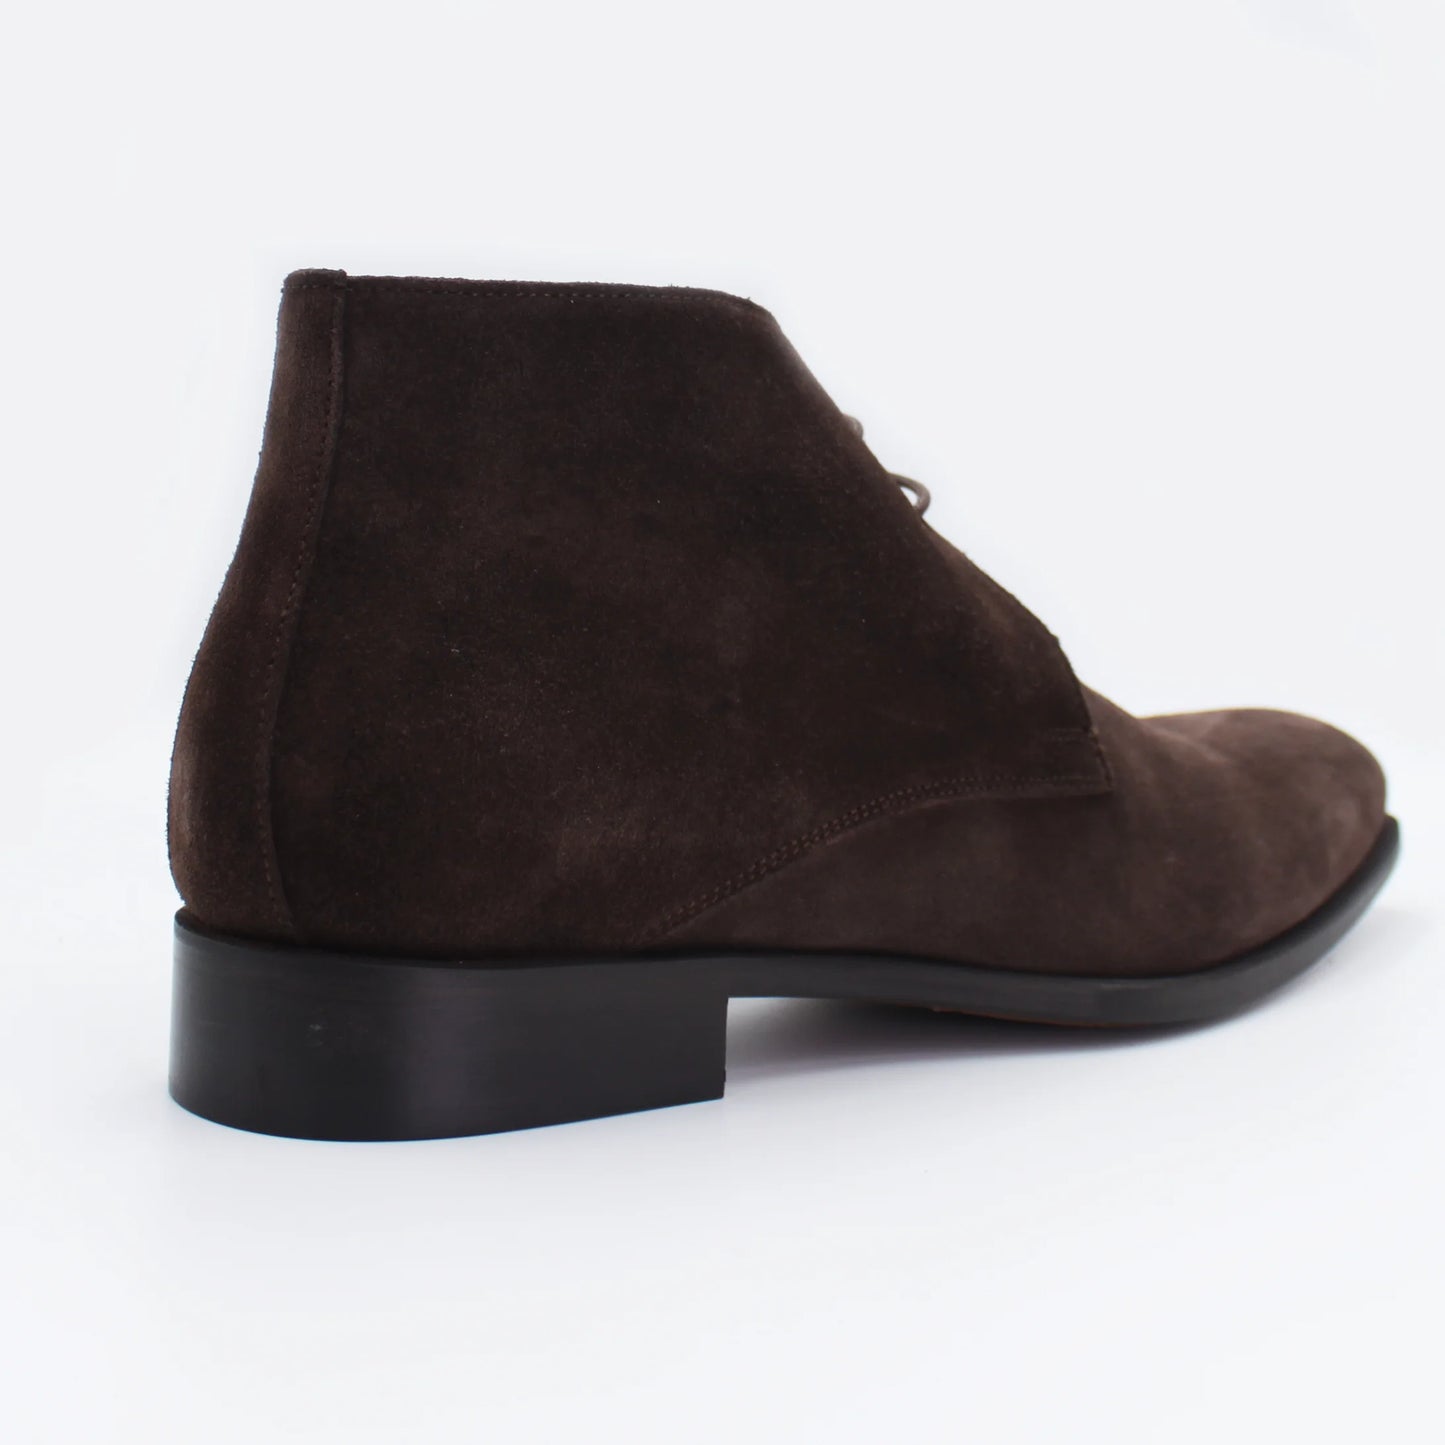 Shop Handmade Italian Suede Chukka Boot in Dark Brown (BE940-05) or browse our range of hand-made Italian boots for men in leather or suede in-store at Aliverti Durban or Cape Town, or shop online. We deliver in South Africa & offer multiple payment plans as well as accept multiple safe & secure payment methods.